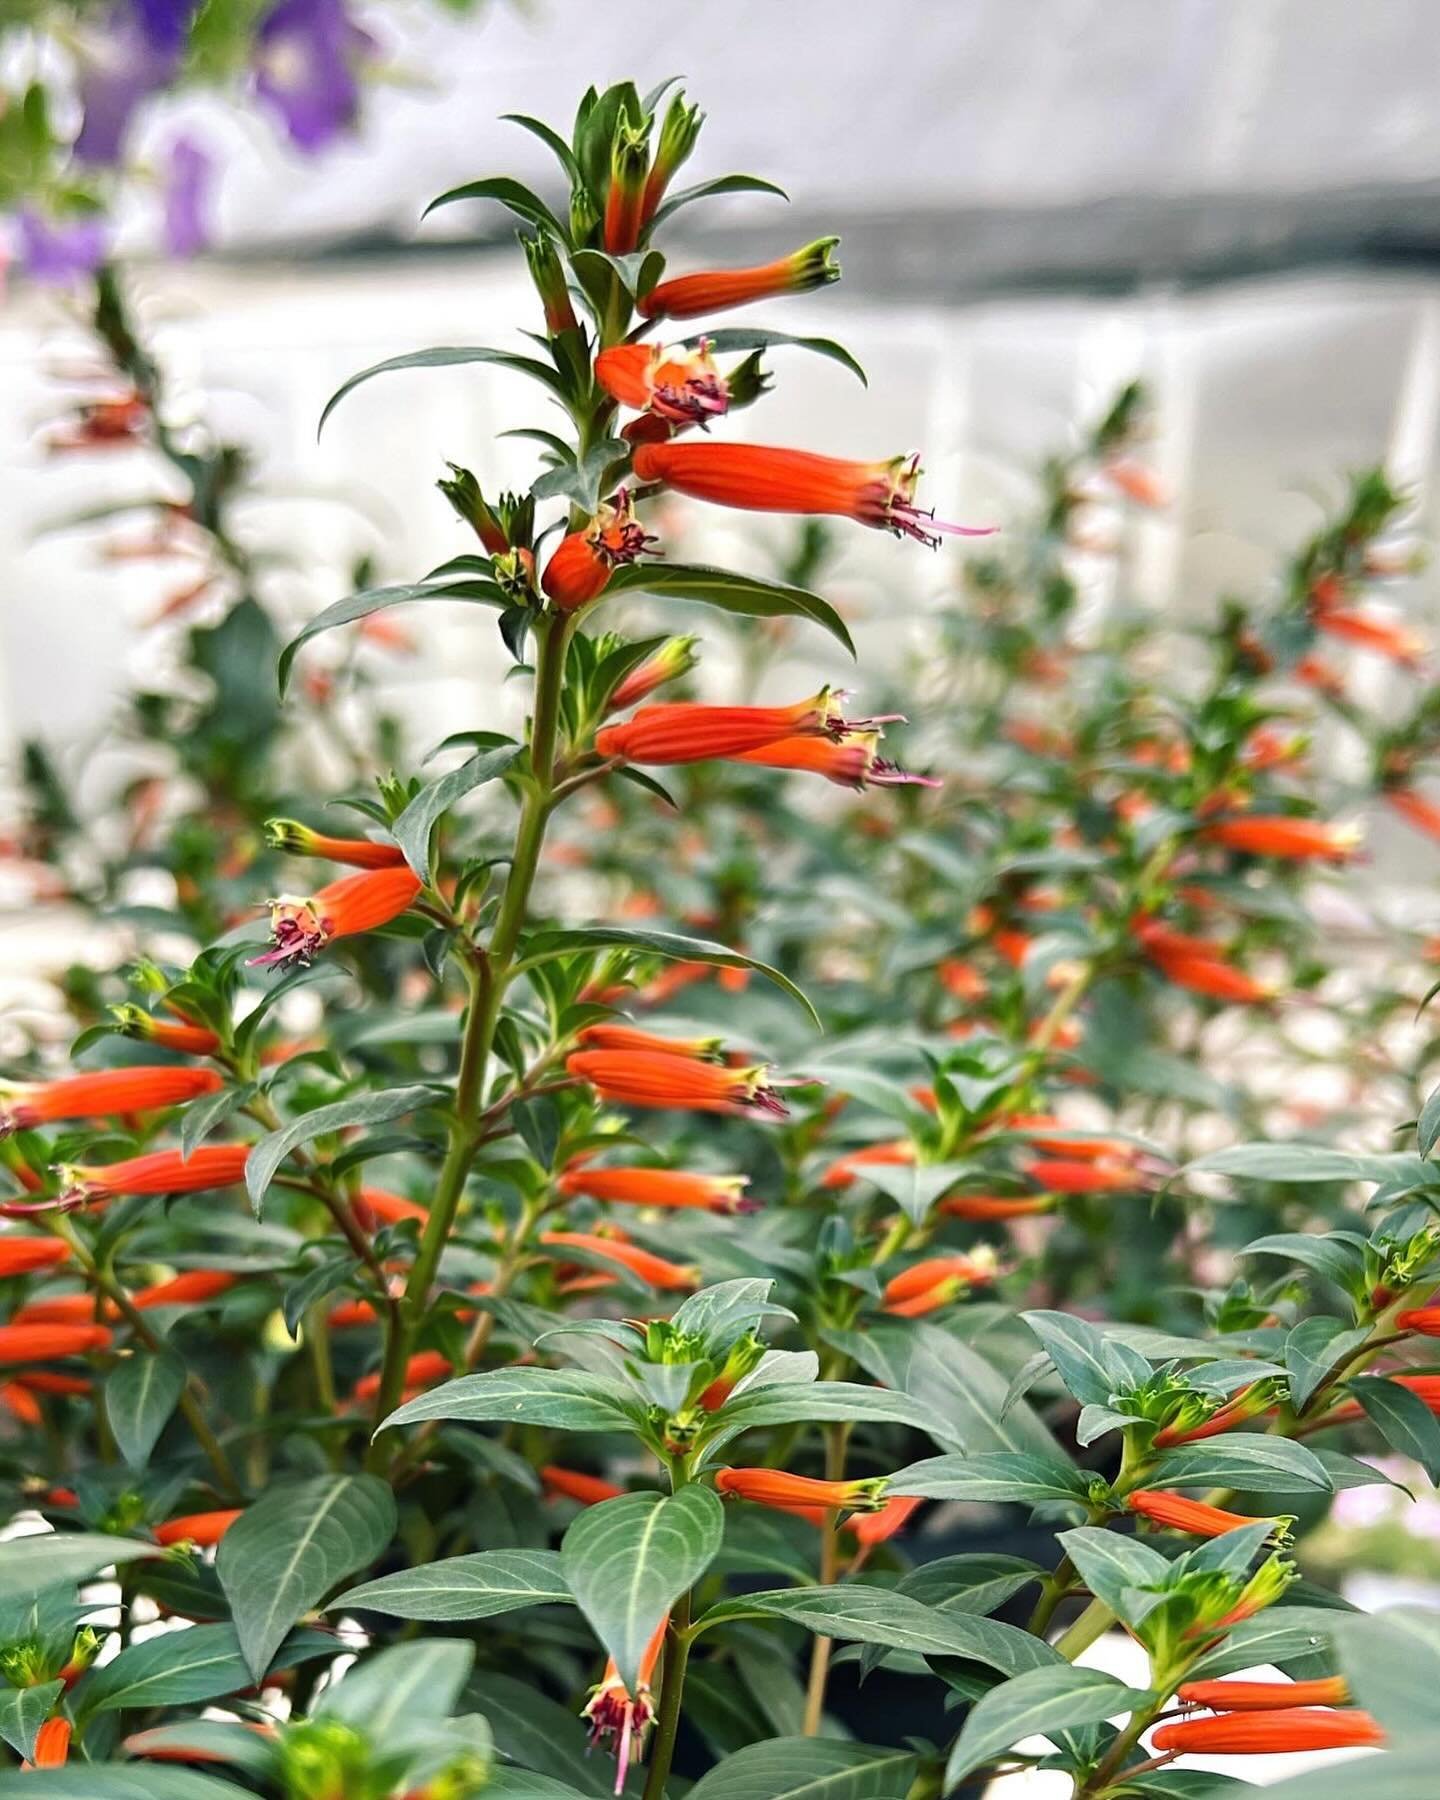 By popular demand ‼️ We have cuphea (aka firecracker or cigar plants) this year, another unique annual with bright blooms the hummingbirds &amp; butterflies LOVE ❤️ This Vermillionaire series will grow around 2x2&rsquo; and loves a warm, sunny spot!
